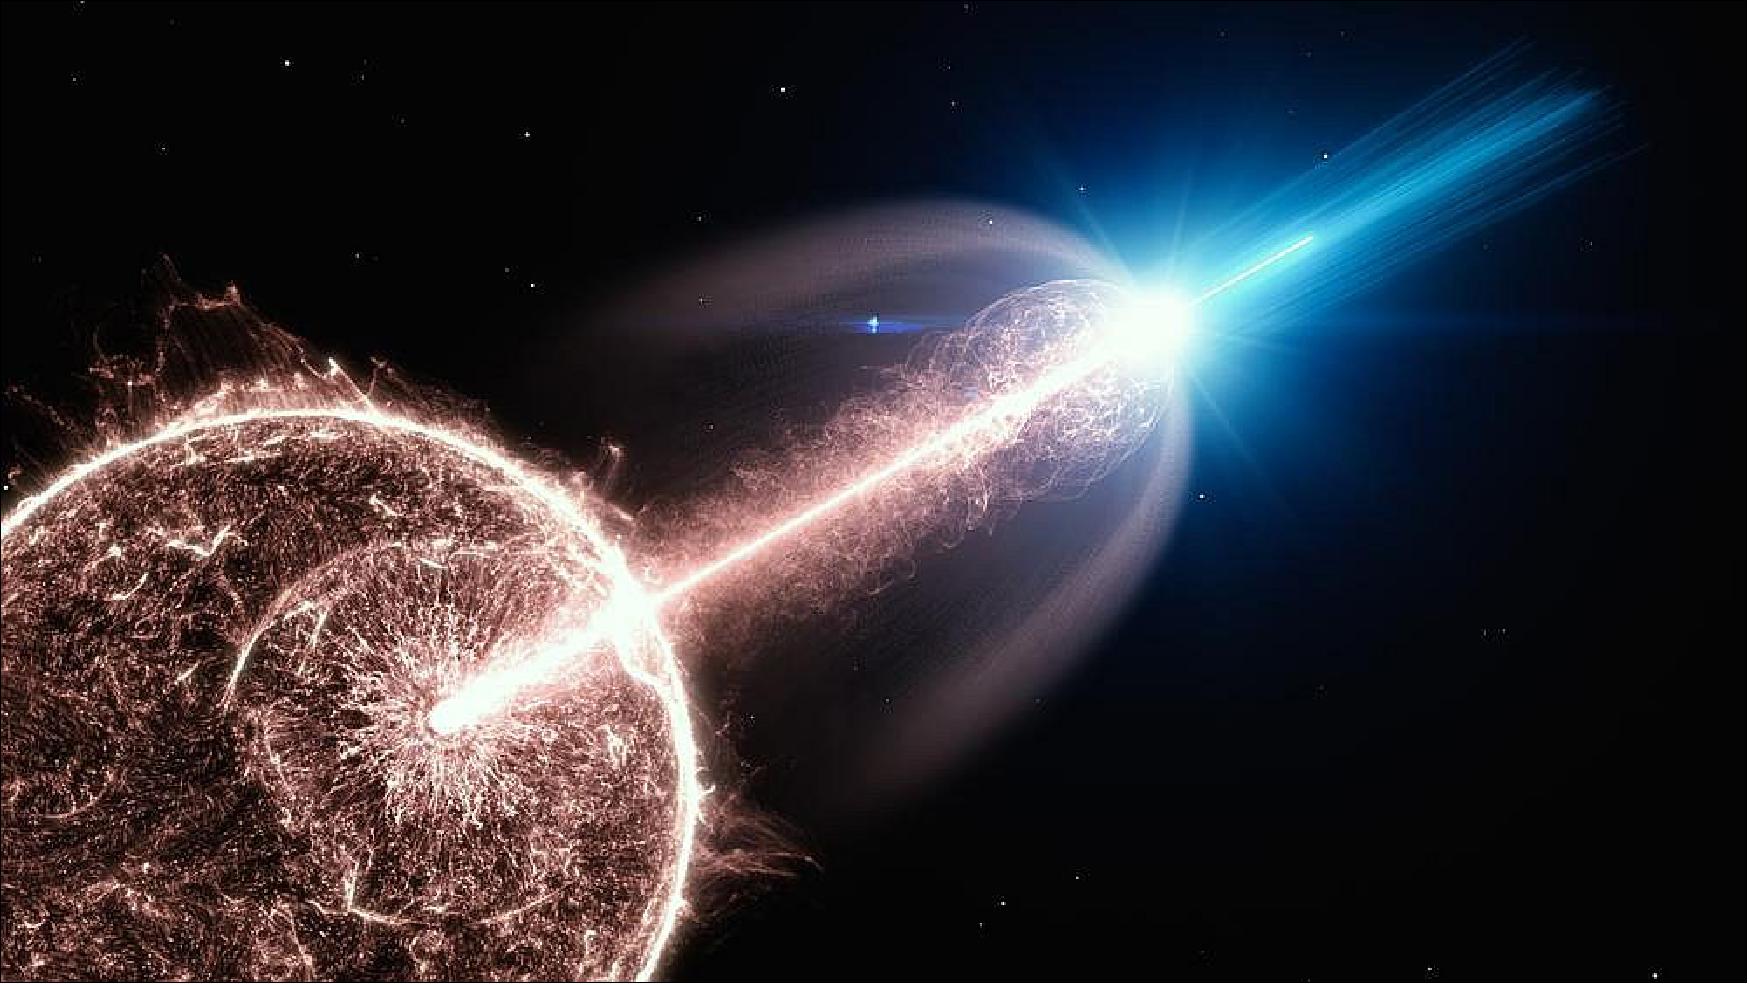 Figure 7: Artist's impression of a relativistic jet of a gamma-ray burst (GRB), breaking out of a collapsing star, and emitting very-high-energy photons (image credit: DESY, Science Communication Lab)